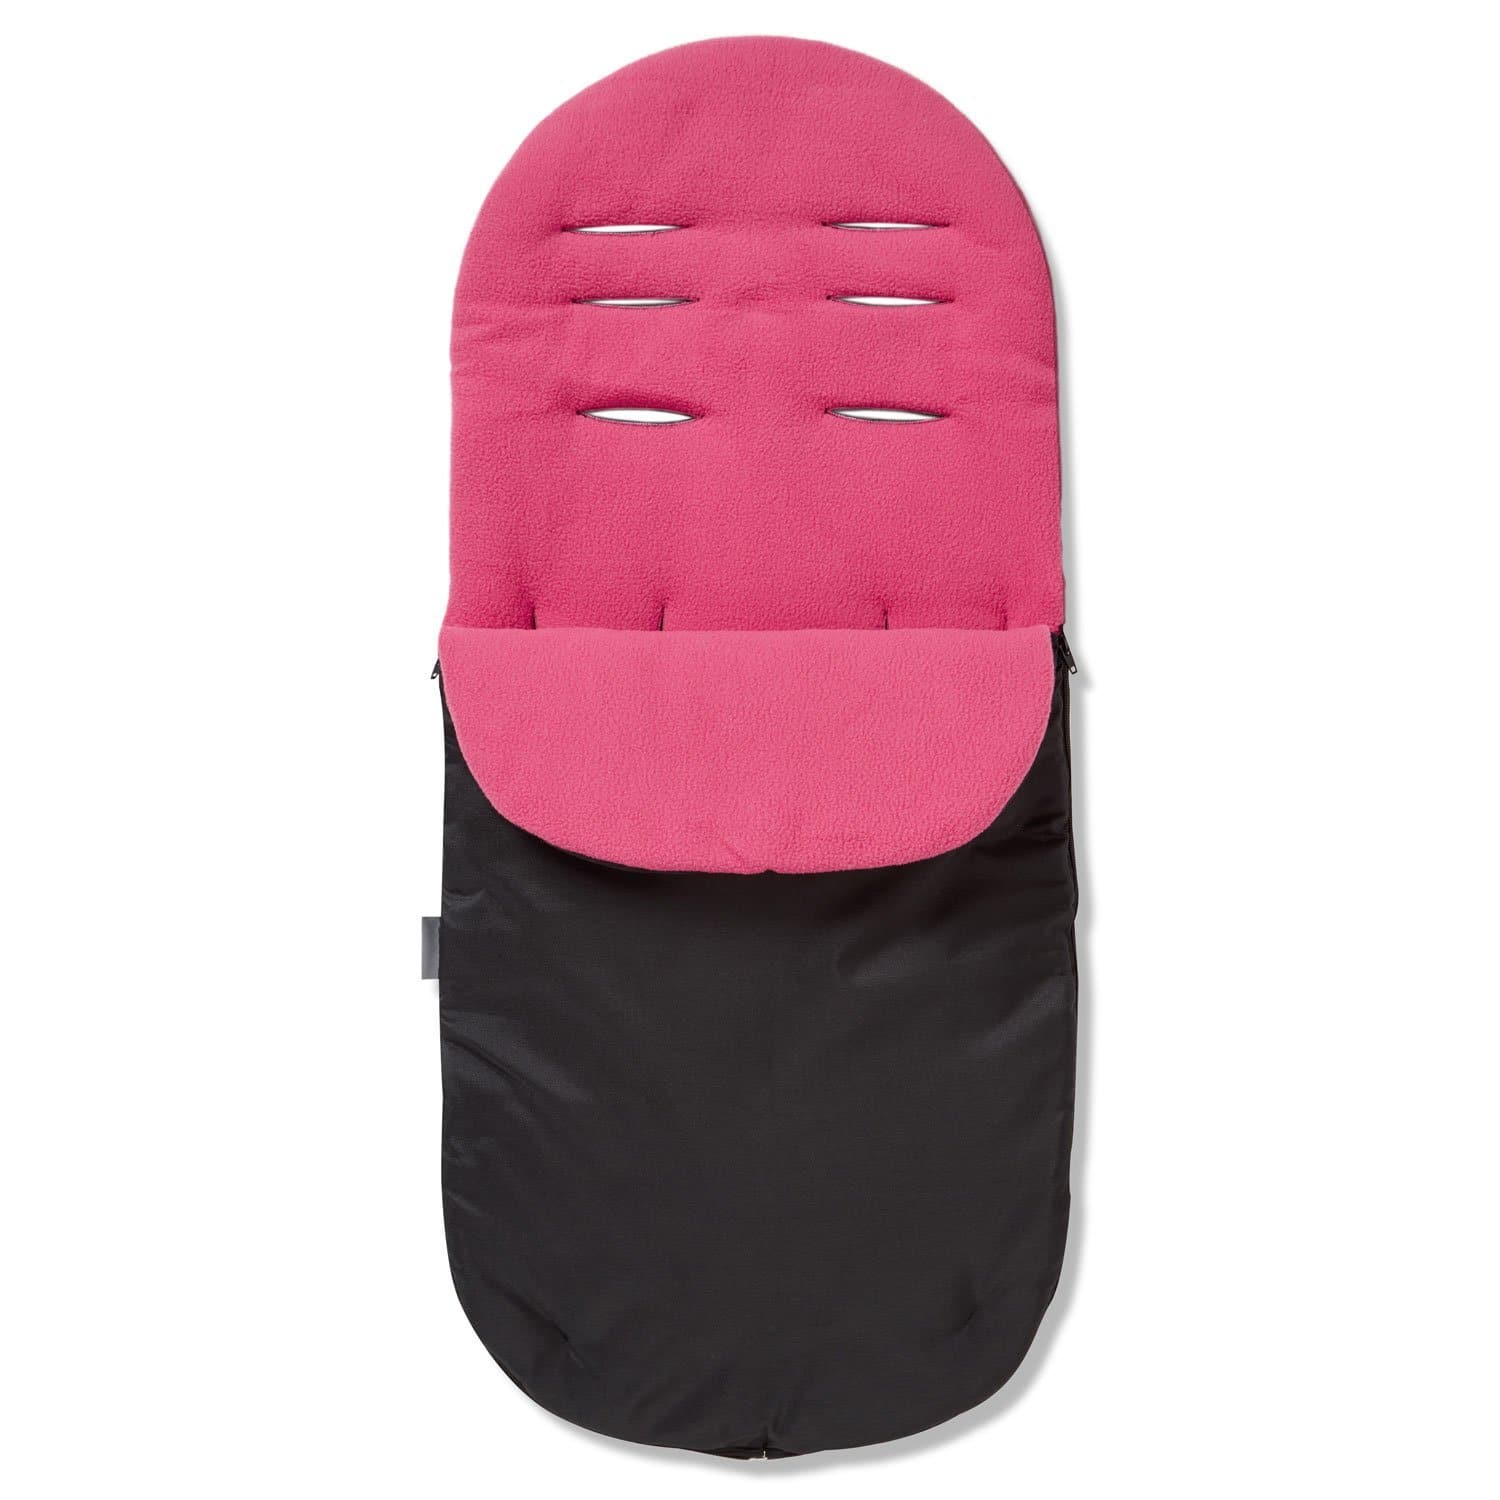 Footmuff / Cosy Toes Compatible with Cybex - Dark Pink / Fits All Models | For Your Little One